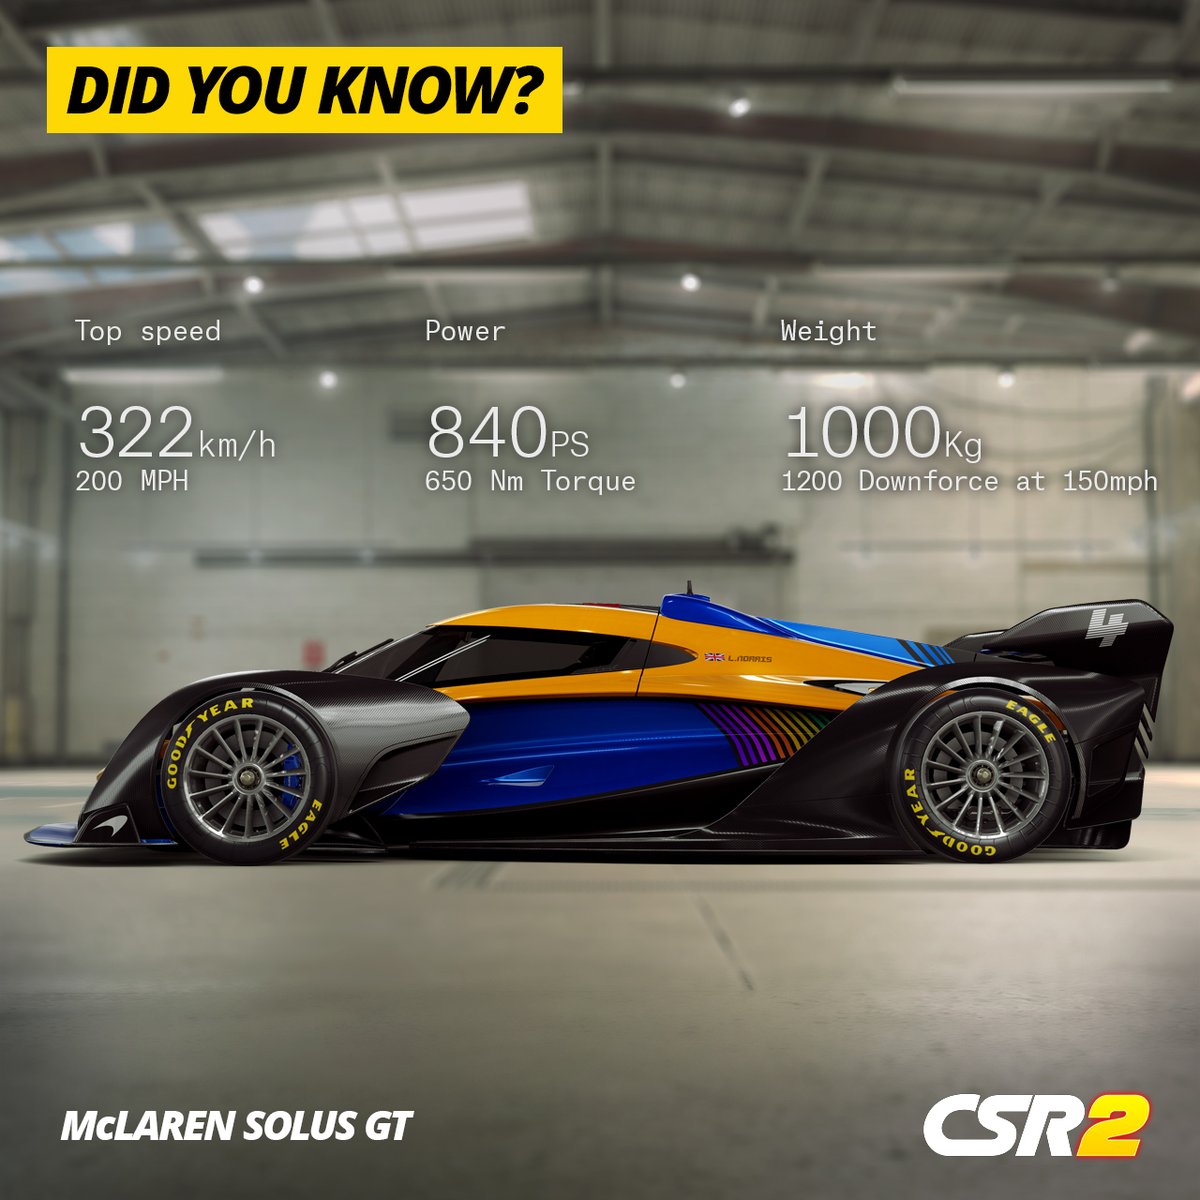 Experience automotive perfection with the McLaren Solus GT. Impeccable craftsmanship, blistering speed, and unmatched performance come together in this extraordinary machine. Get ready to redefine what's possible on the road. 

Play #CSR2 now: zynga.social/csr2tw